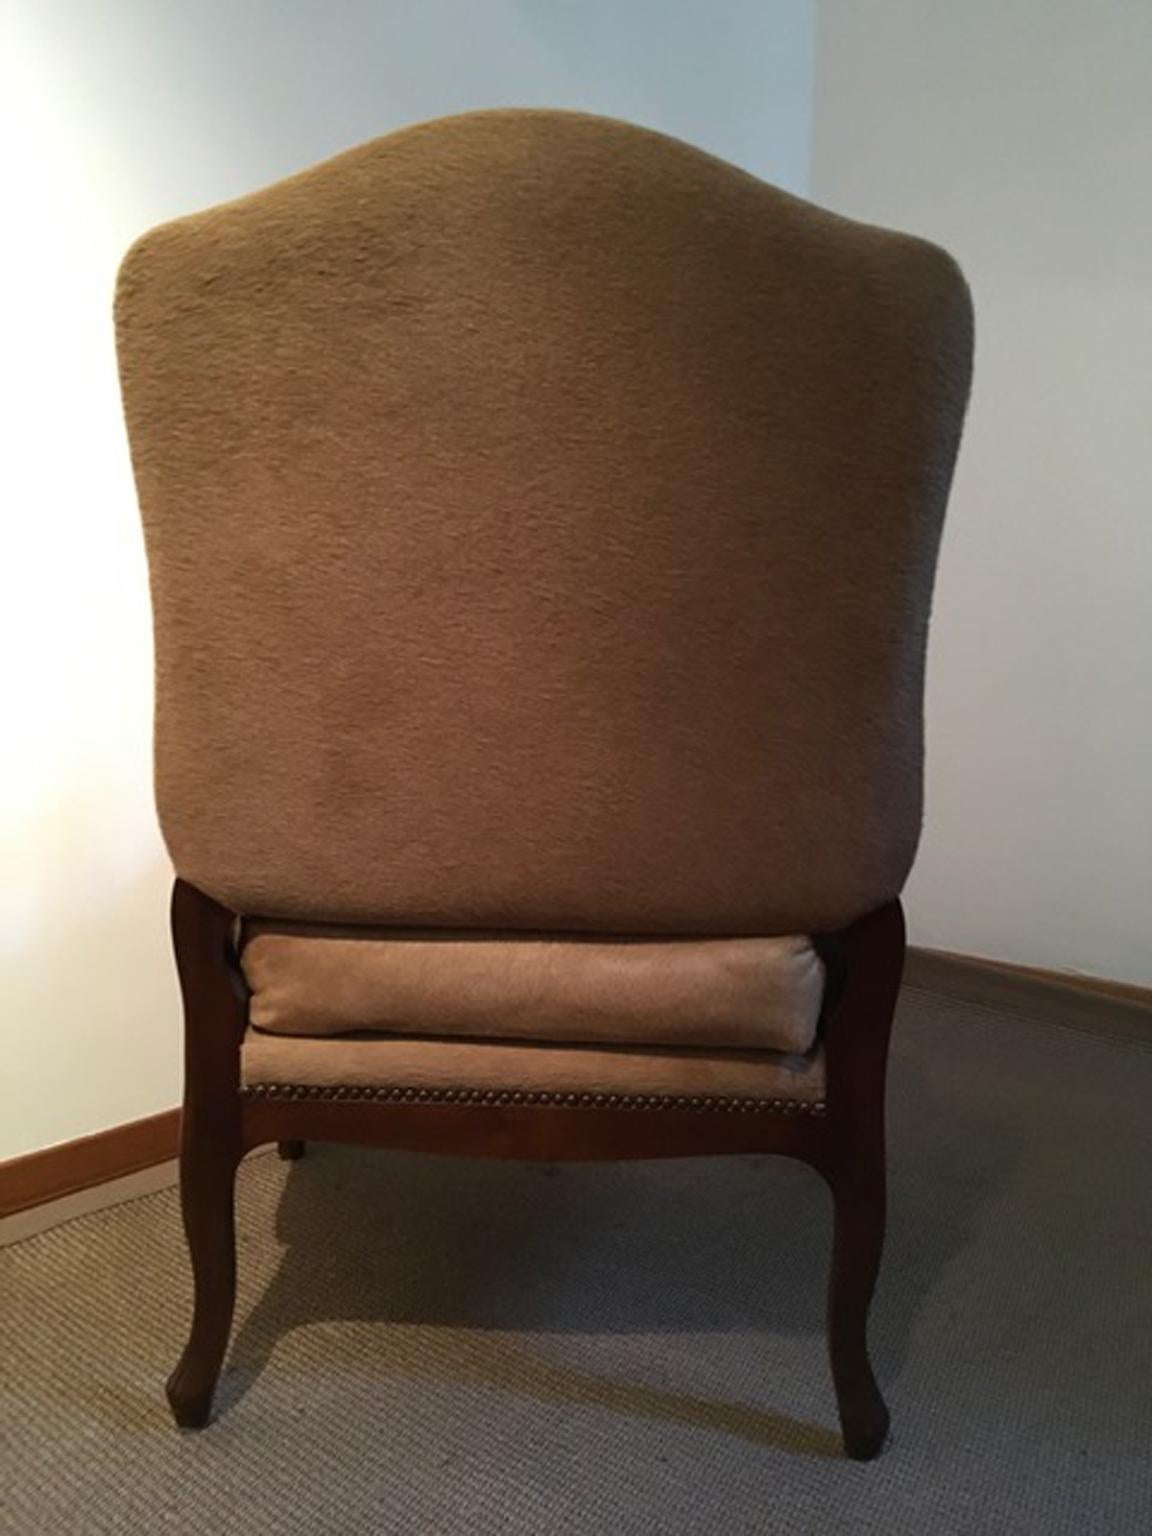 1990 Italy Postmodern Blond Cow Leather Armachair For Sale 11